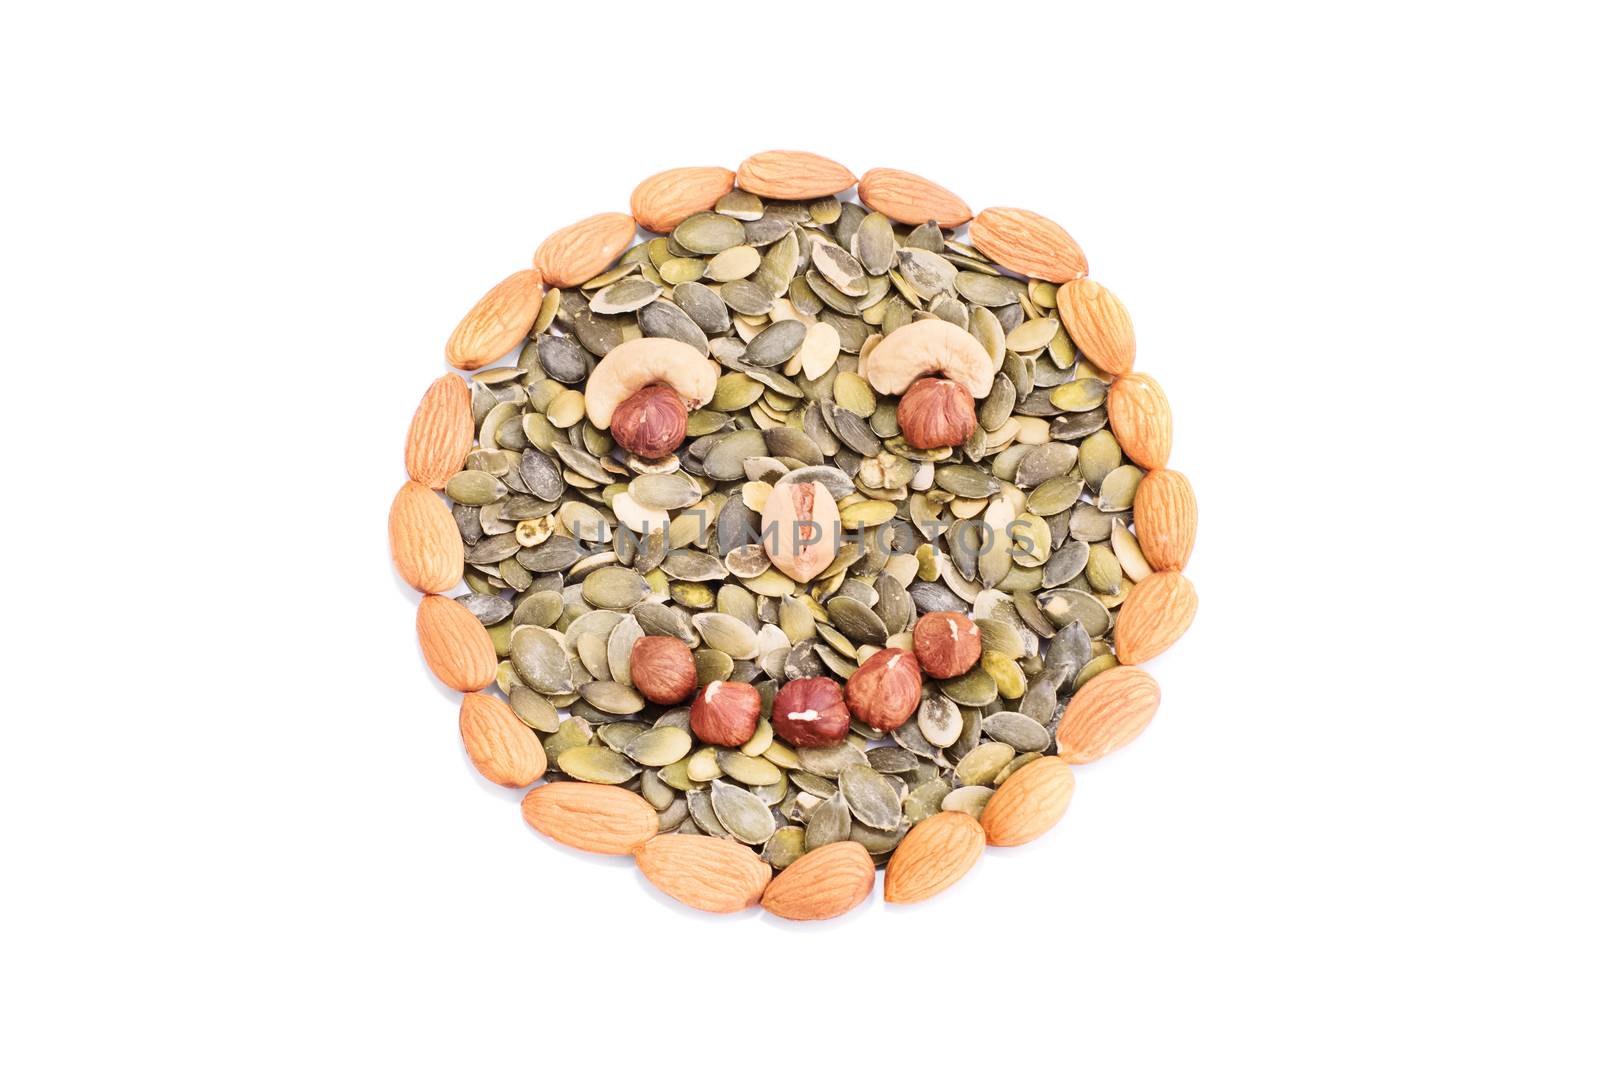 Smiley face made out of variety of nuts and seeds, isolated on white background.